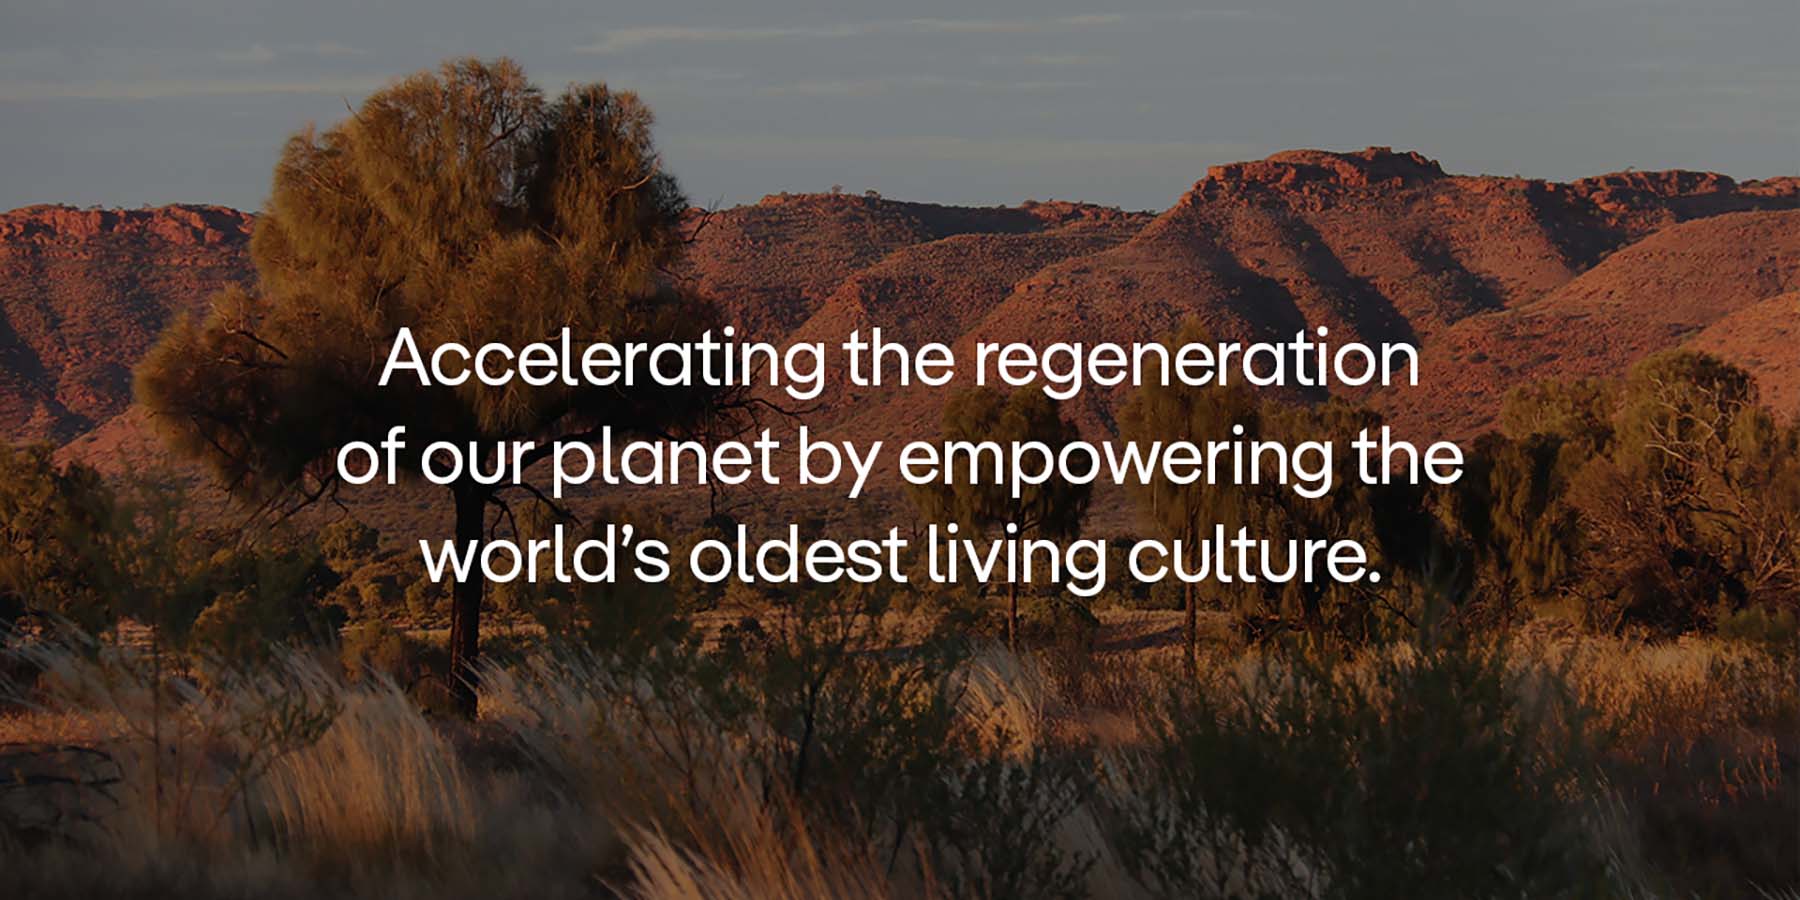 brand purpose text with Australian outback image